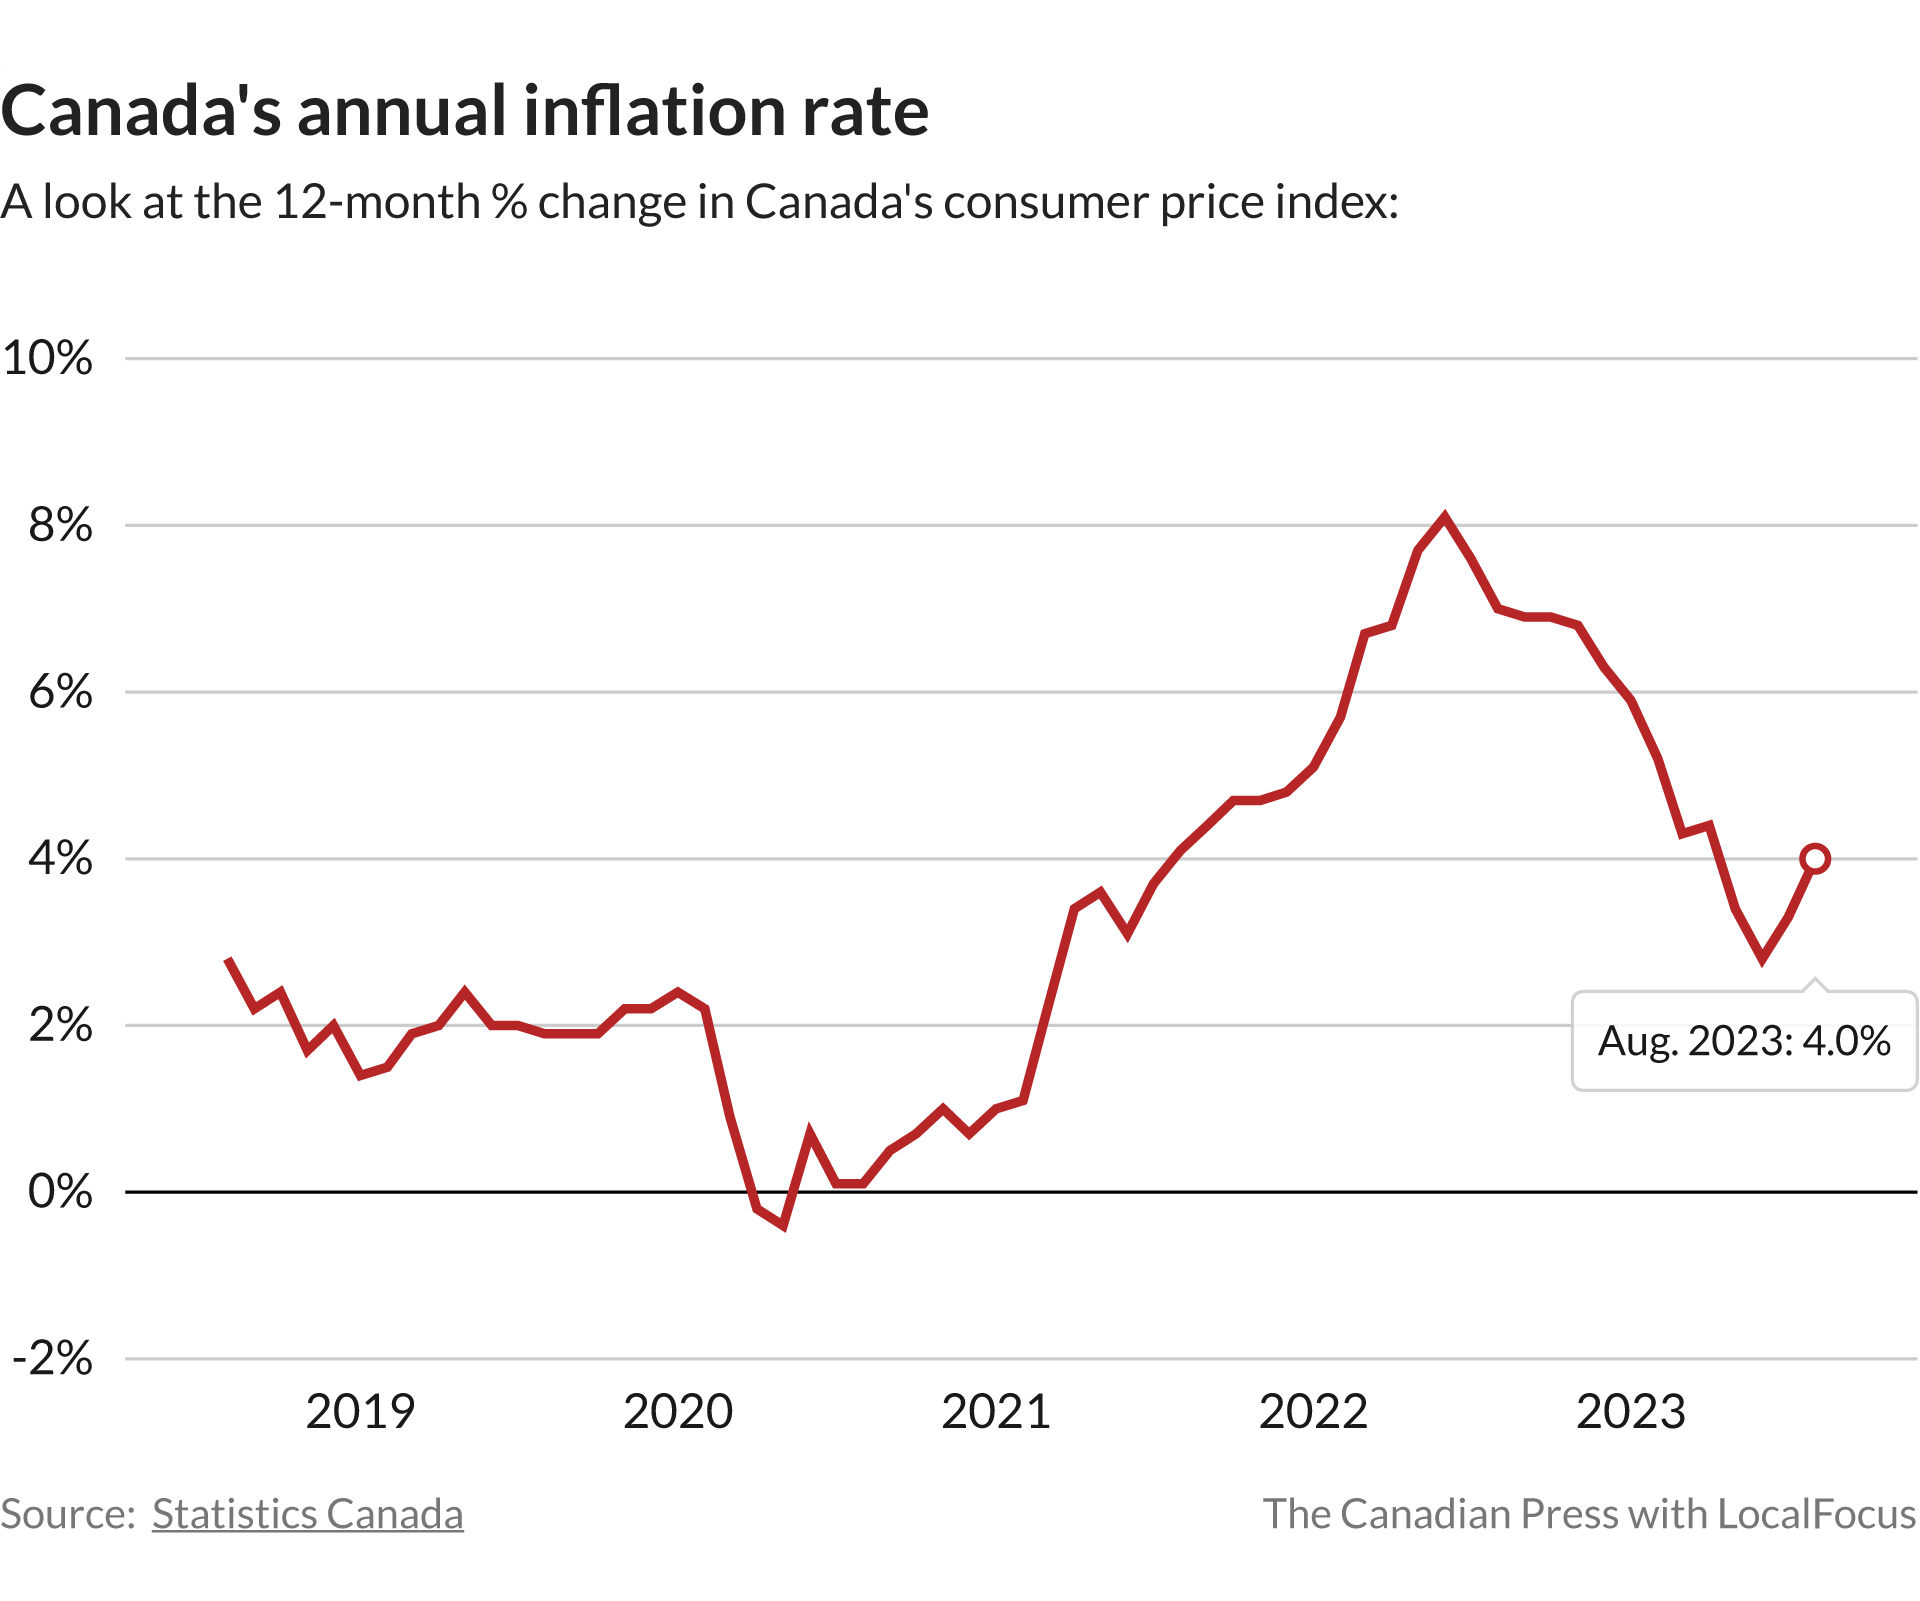 Canada’s inflation rate jumps to 4, making the BoC’s next rate